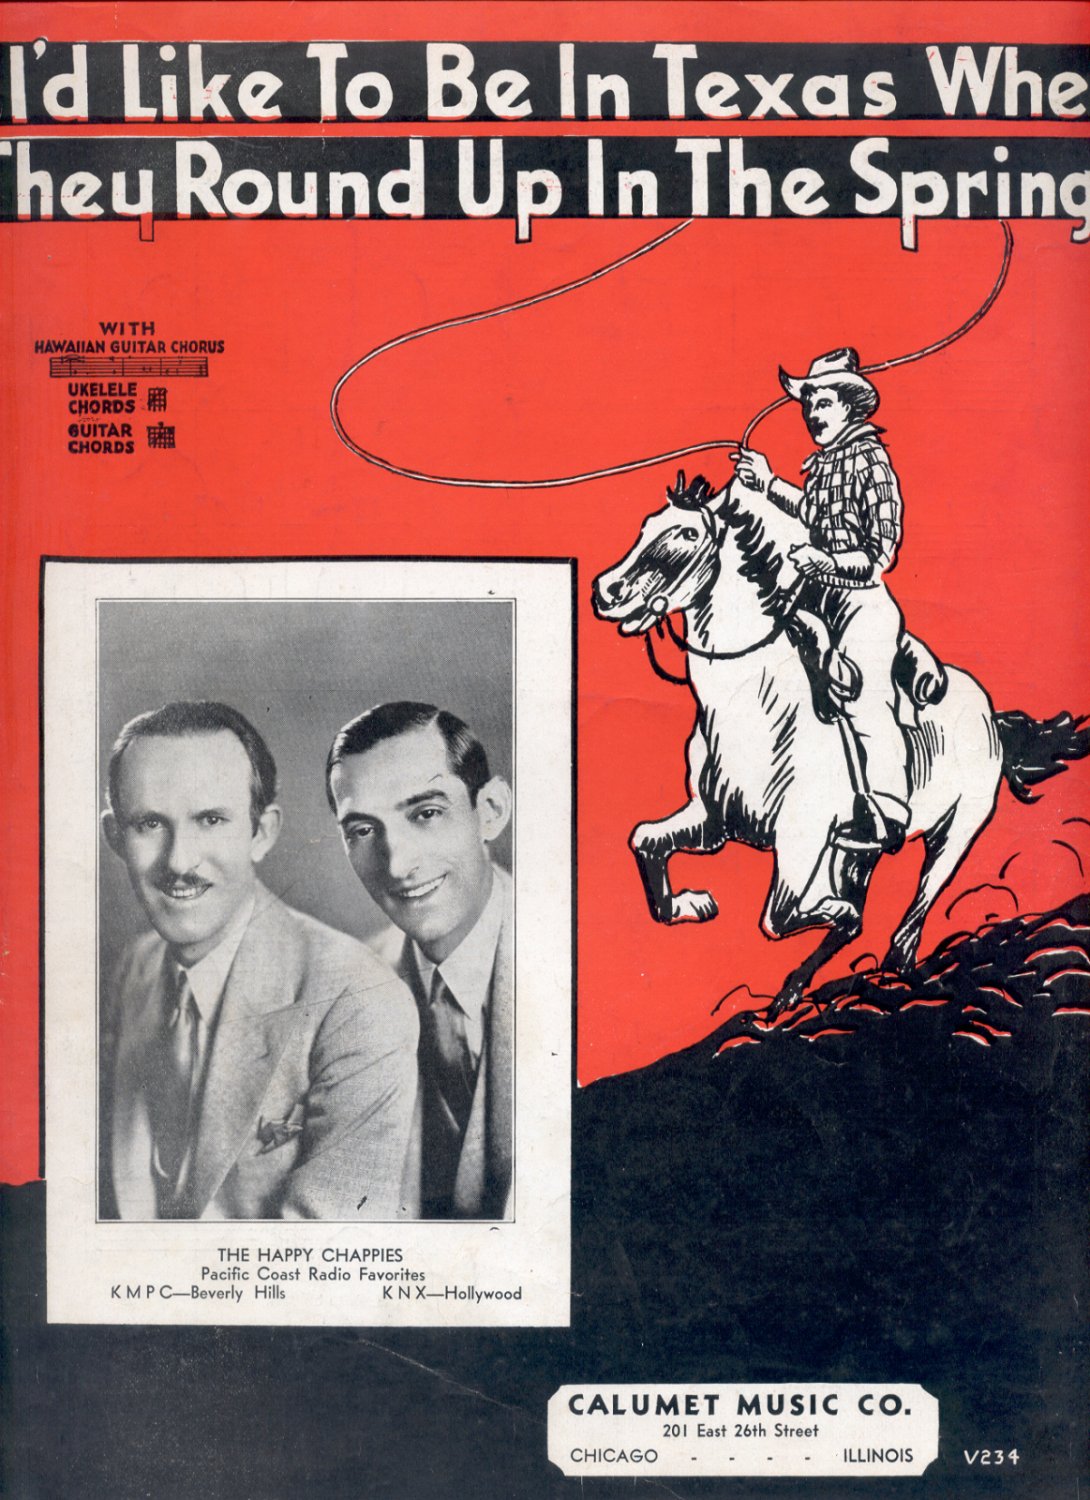 I'D LIKE TO BE IN TEXAS WHEN THEY ROUND UP IN THE SPRING 1937 VINTAGE SHEET MUSIC